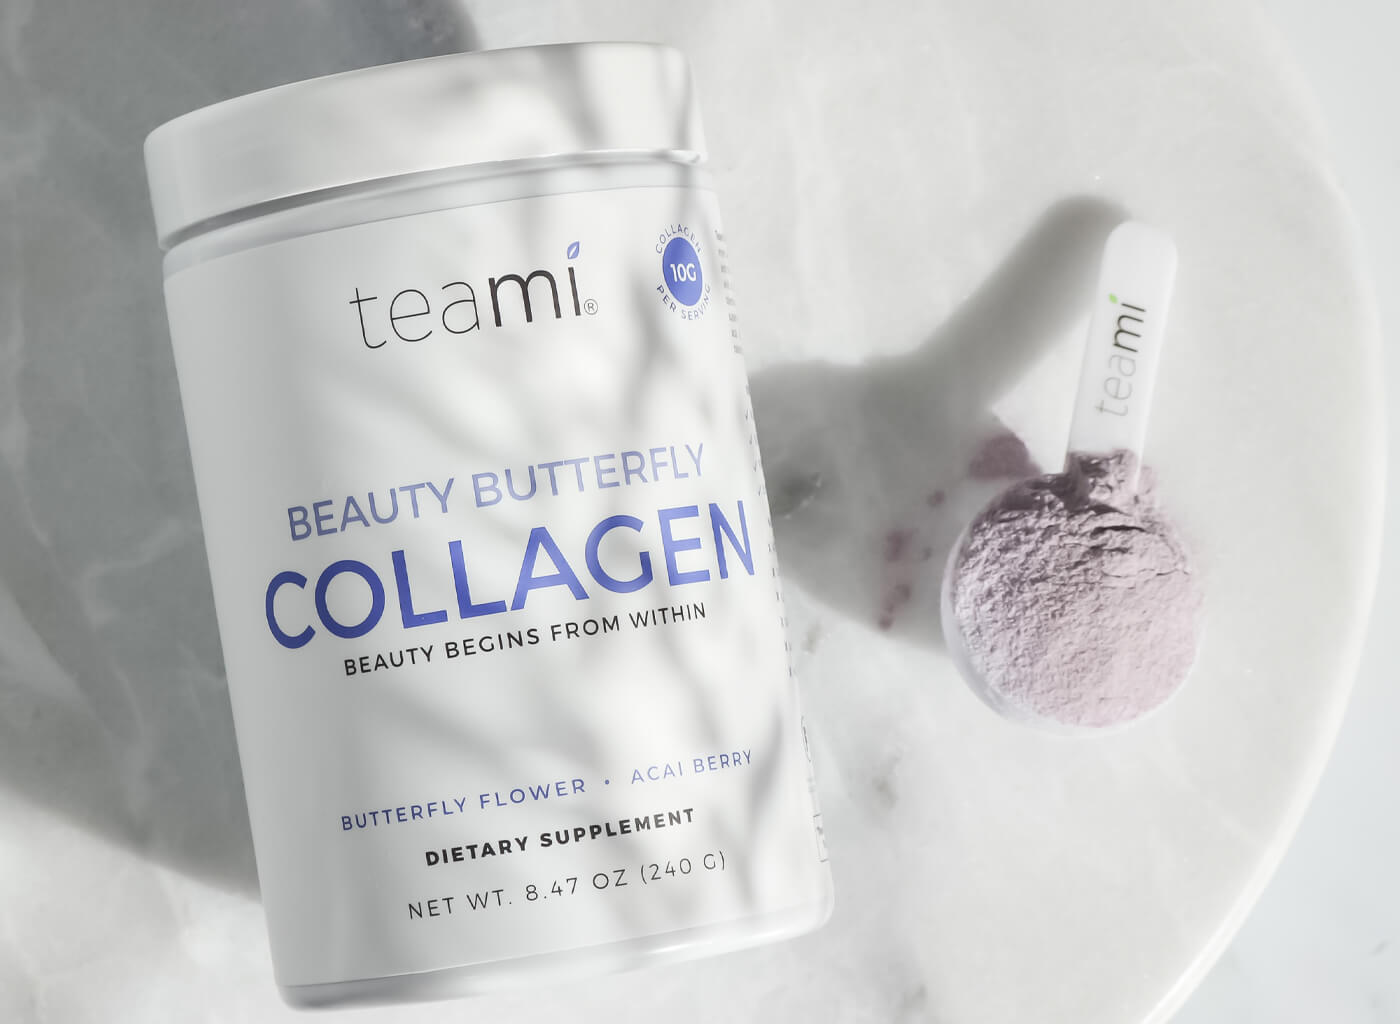 Teami Beauty Butterfly Collagen tub on marble surface